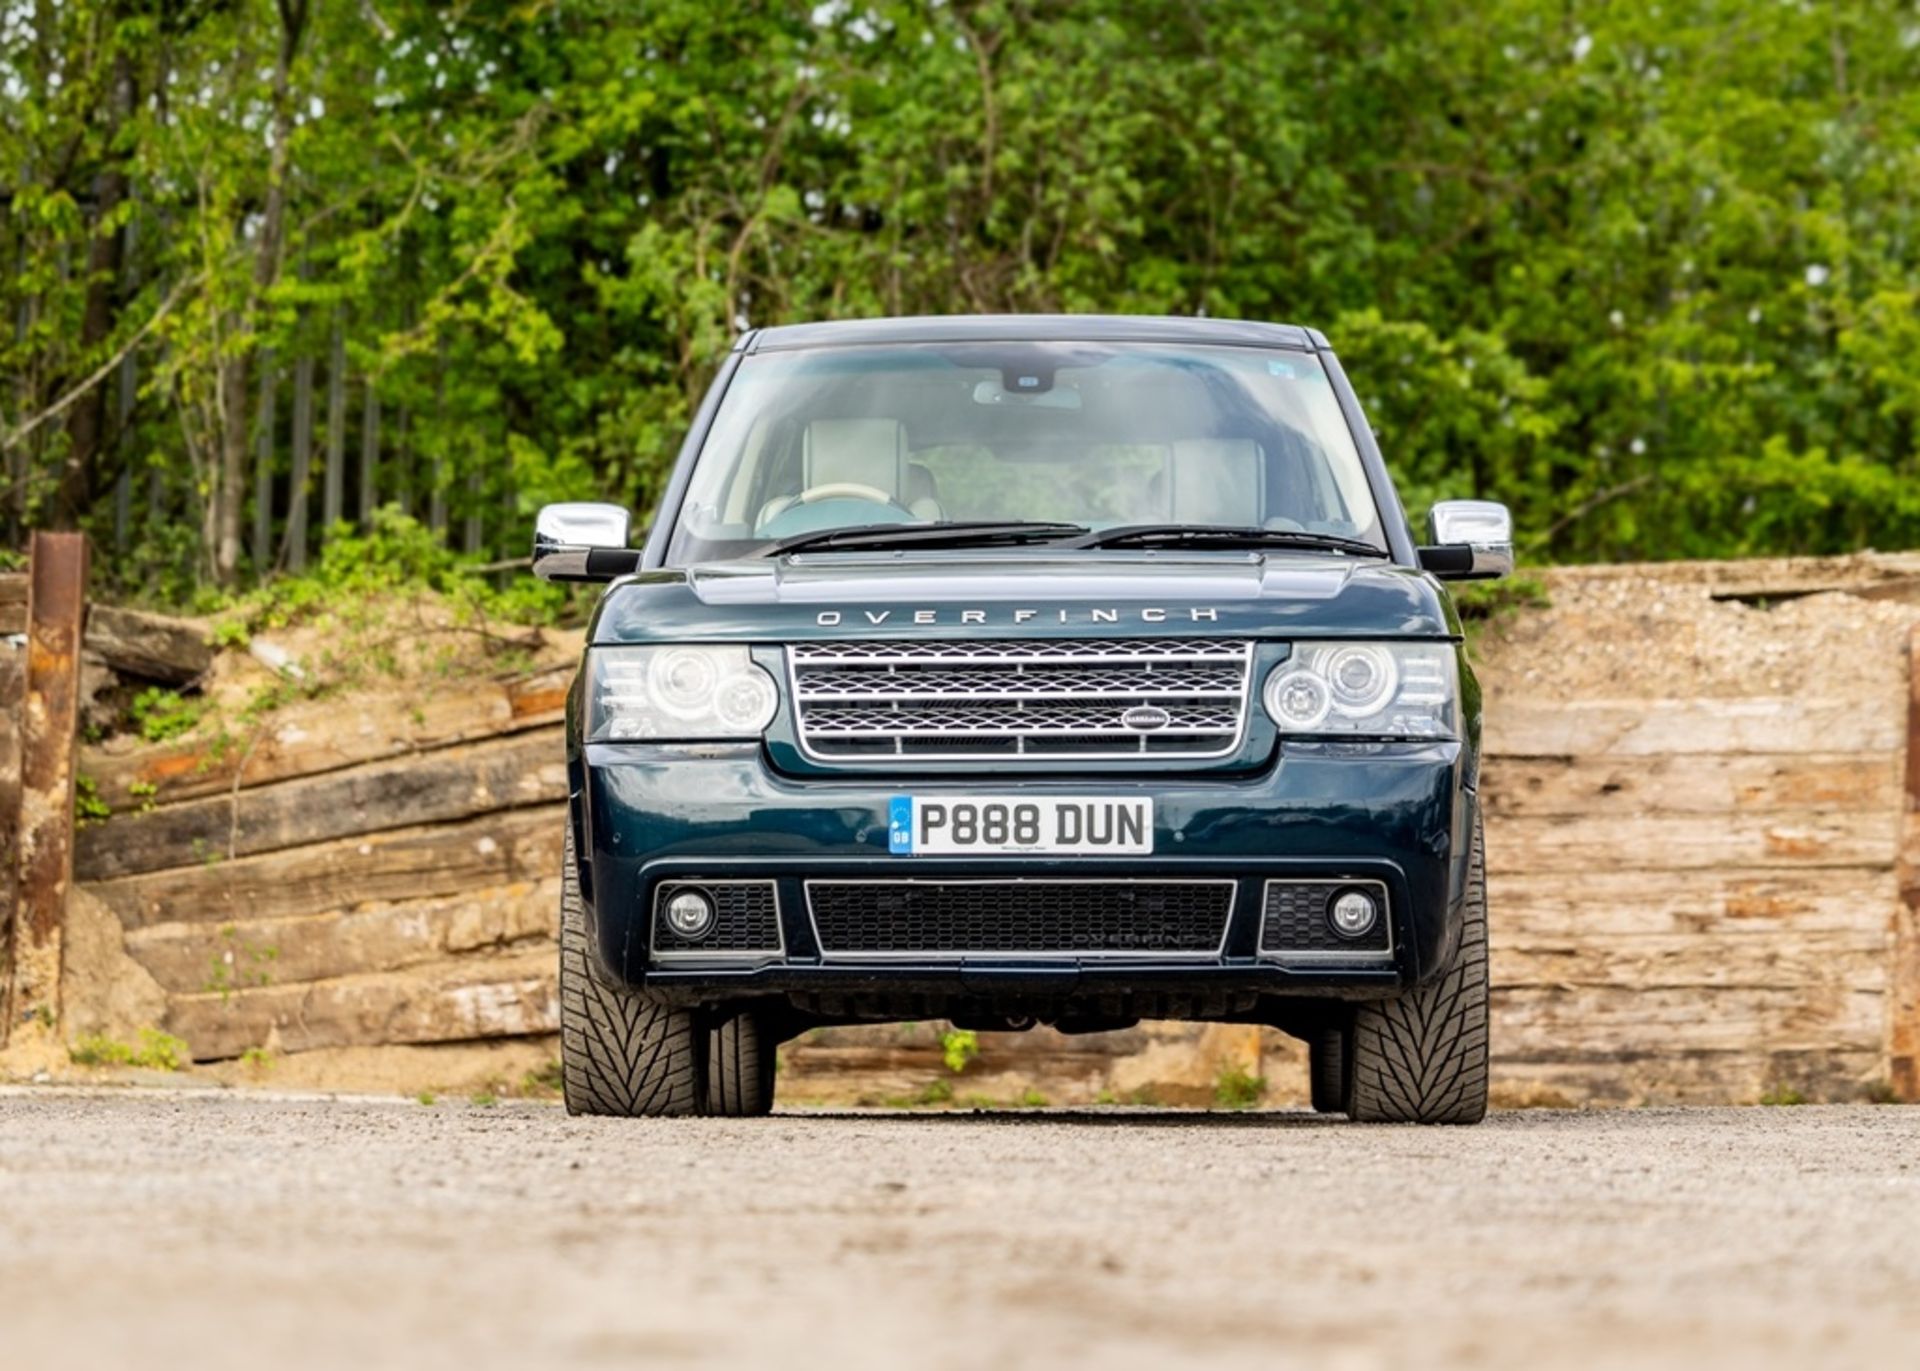 2009 Range Rover L322 Holland & Holland 5.0 Supercharged - Image 39 of 40